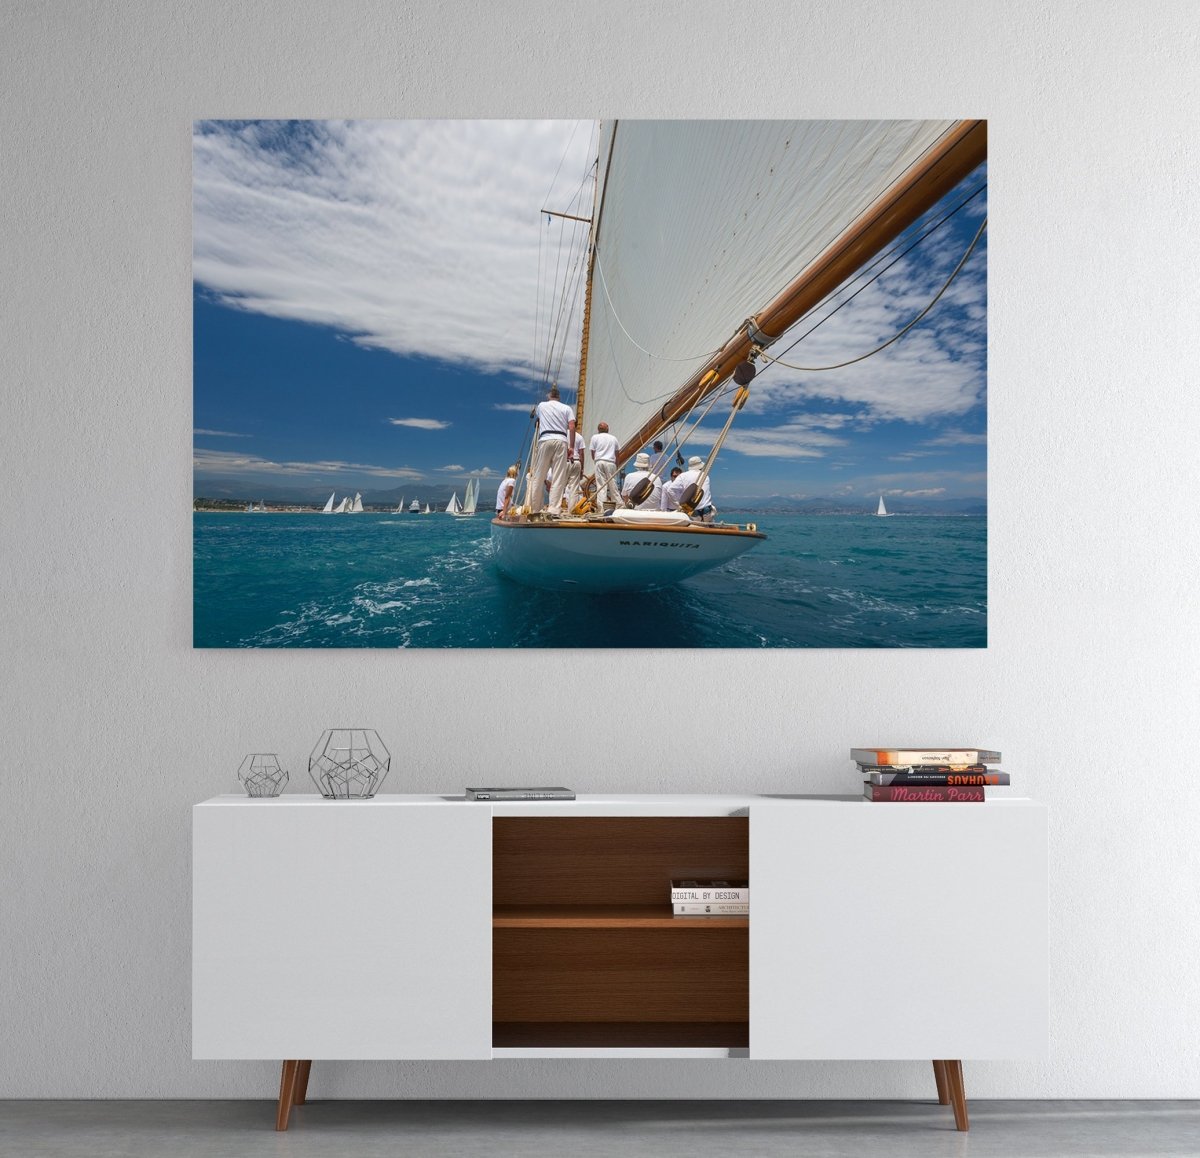 Sailing Boat on the Riviera Canvas Print Wall Art - 1X1302541 - Art Fever - Art Fever